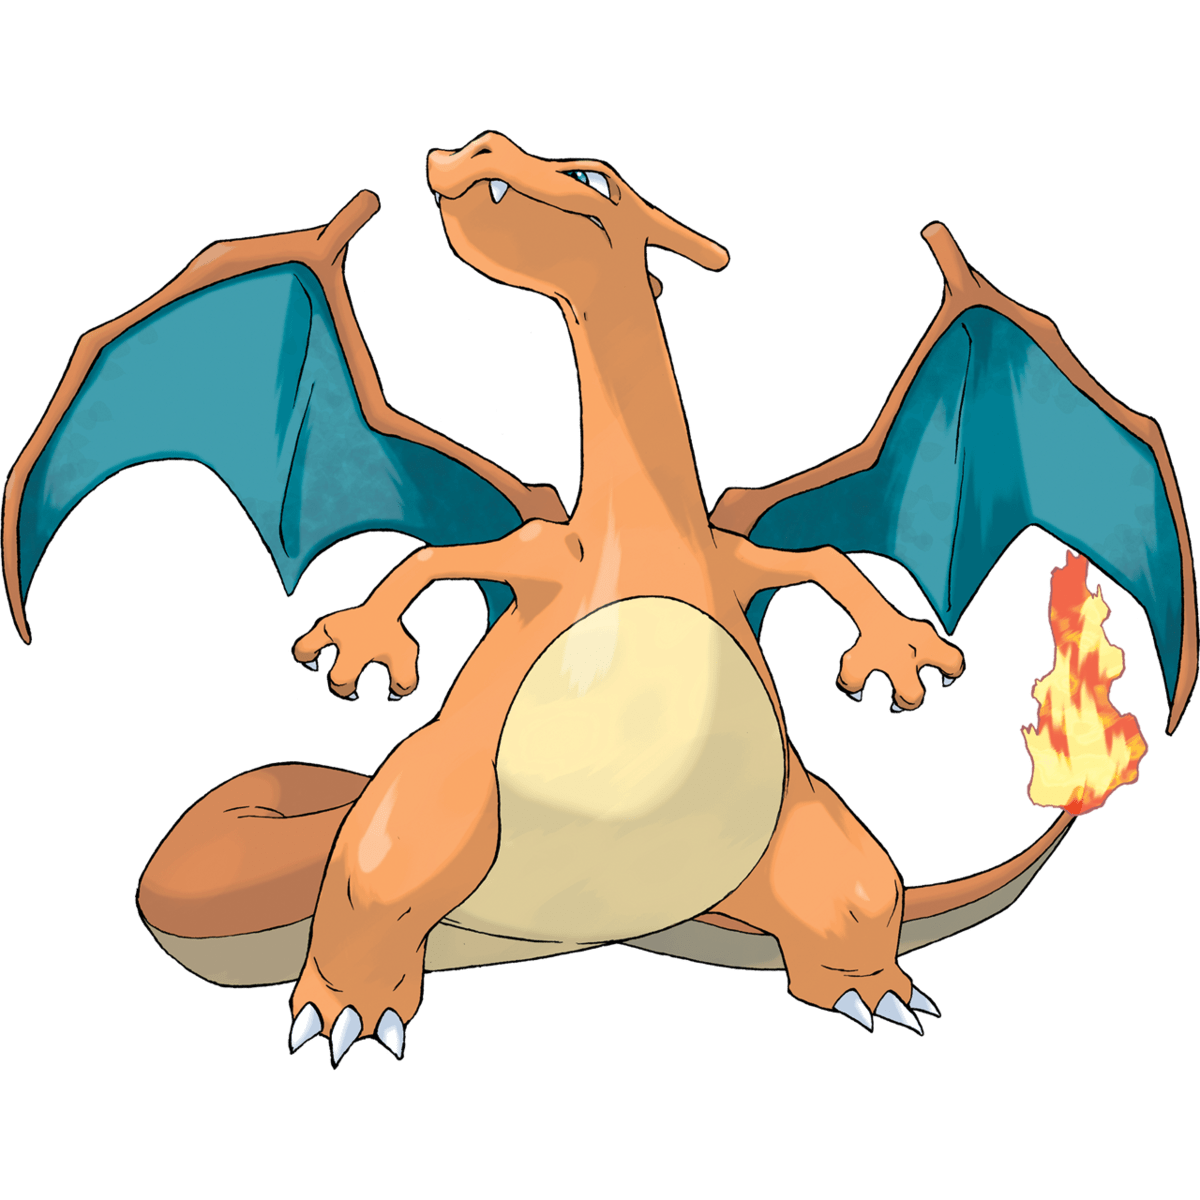 Charizard, the best Fire type and one of the best Flying type Pokemon in Pokemon Let's Go